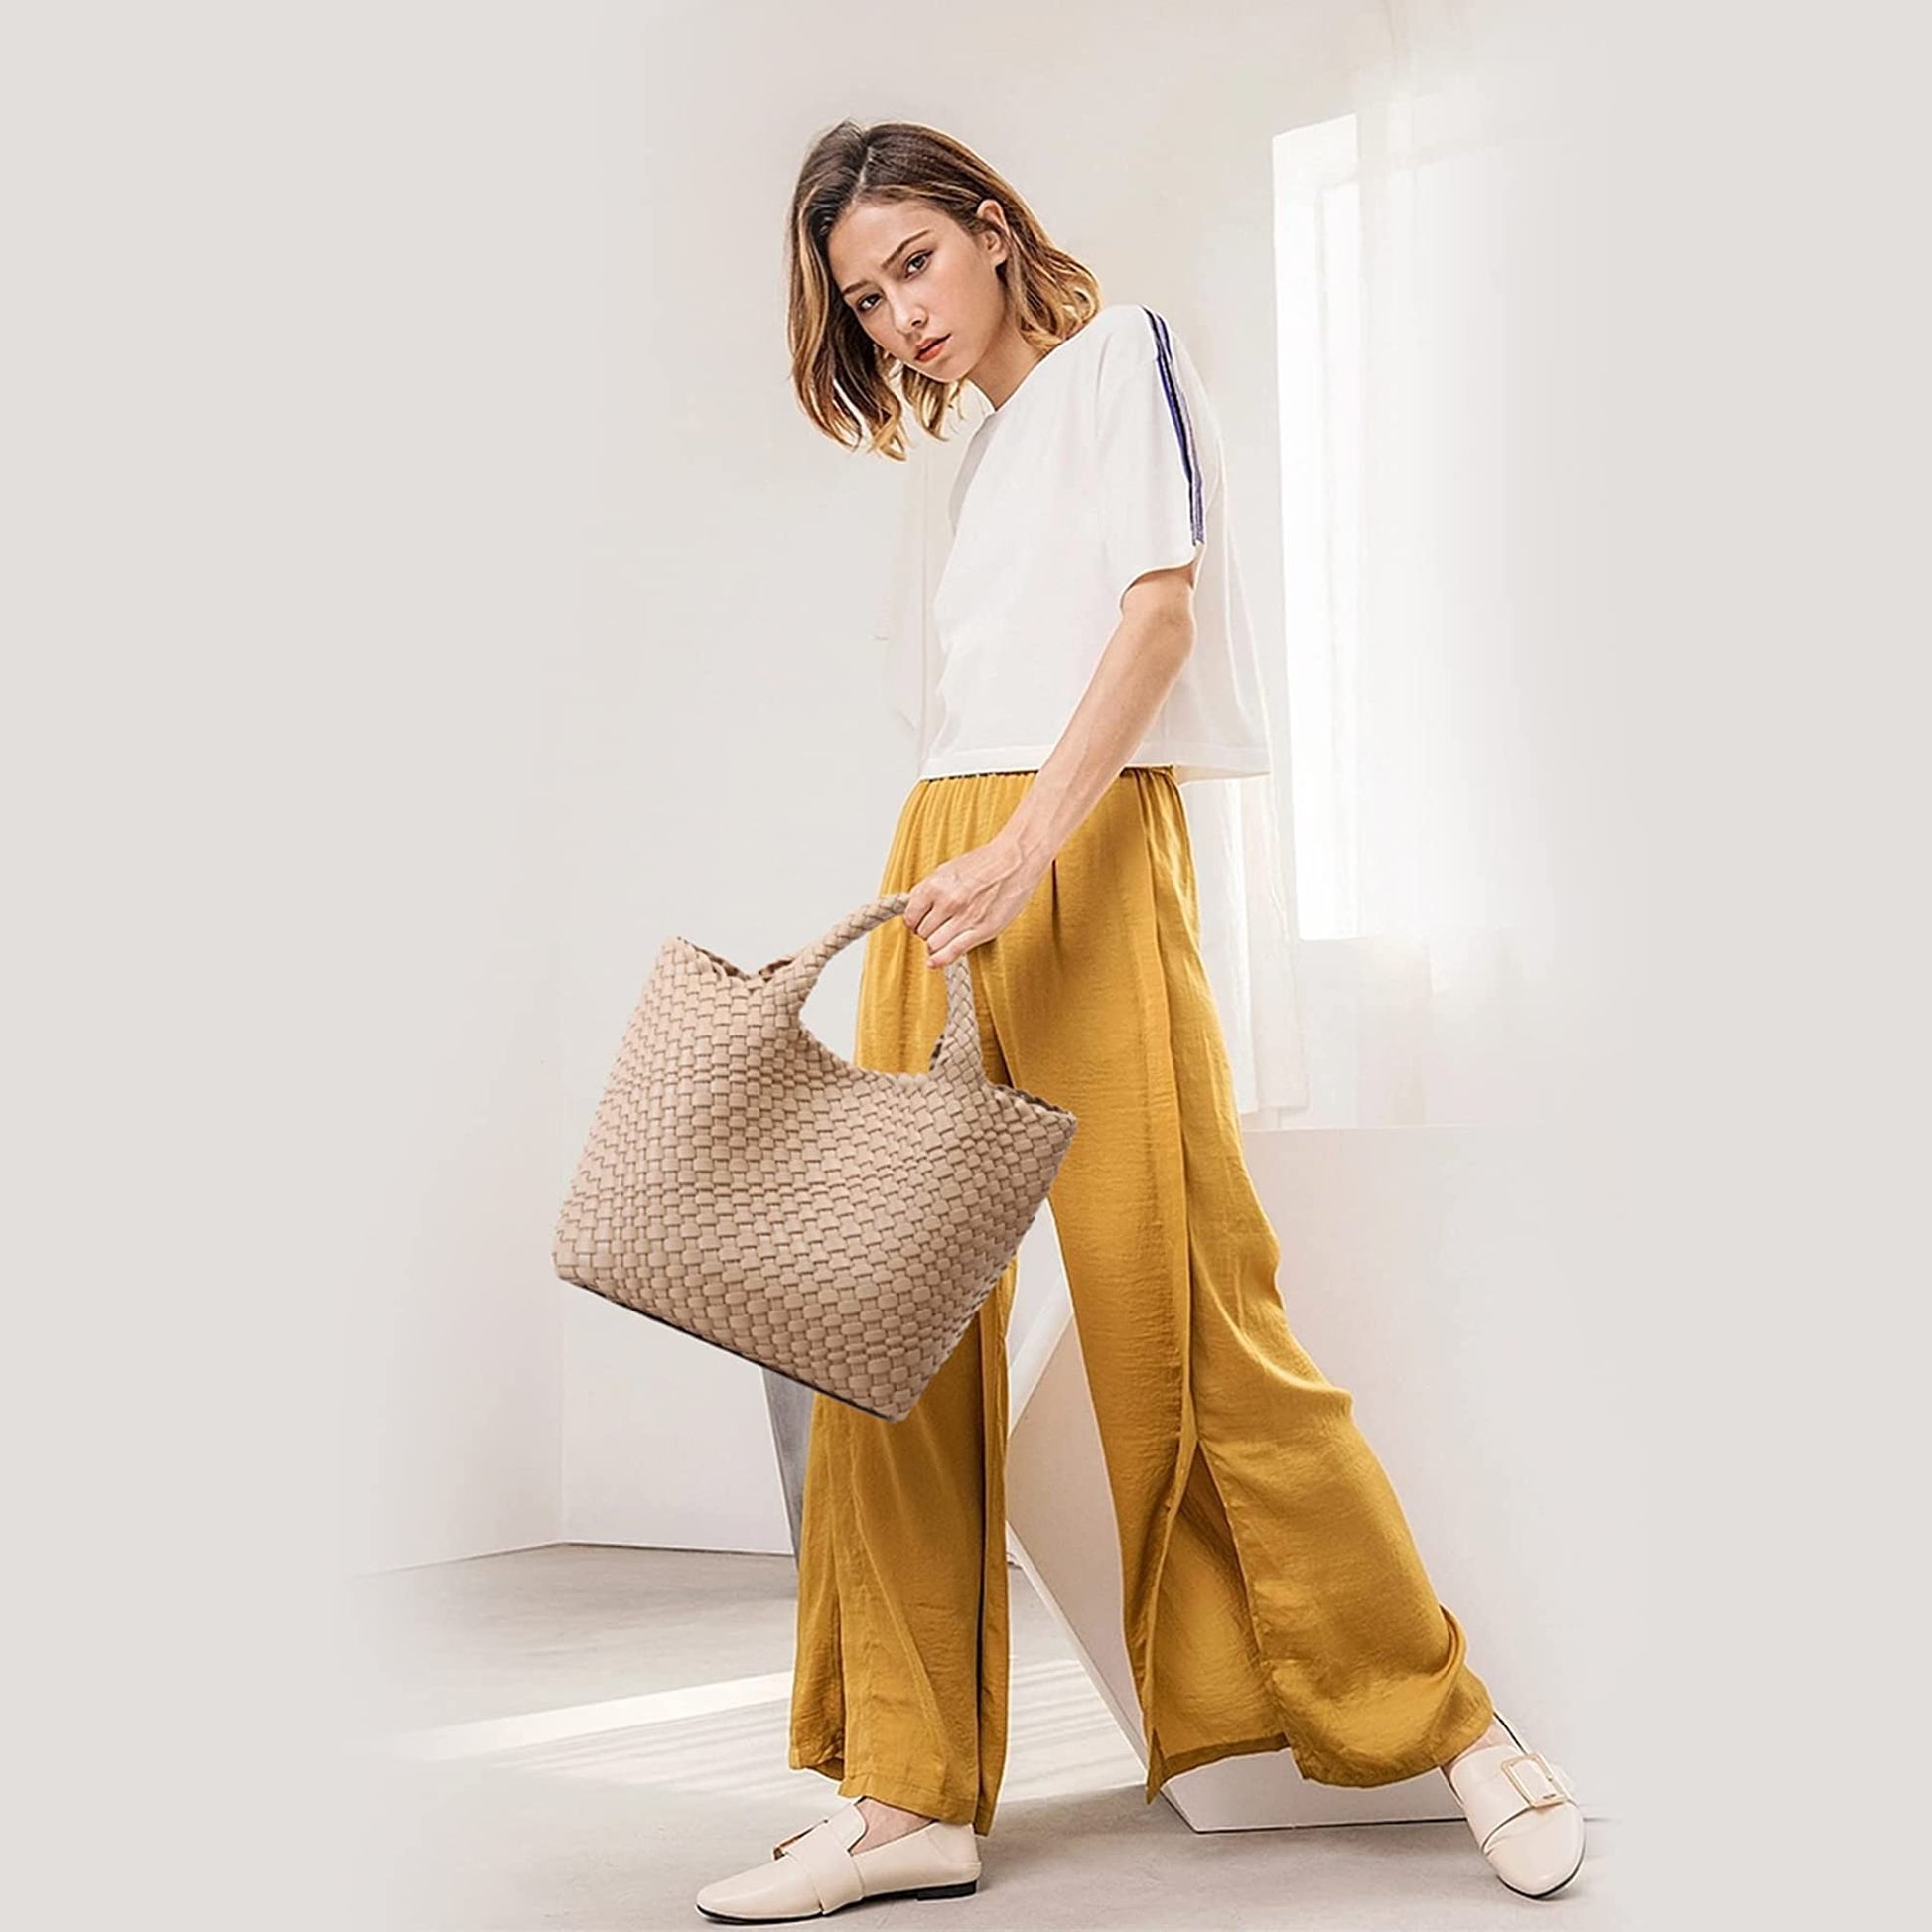 Leather Woven Tote Bag Large Shoulder Bag Shopper Tote Bags with Lined Bag  of Cotton Fashion Travel Handbags for Women